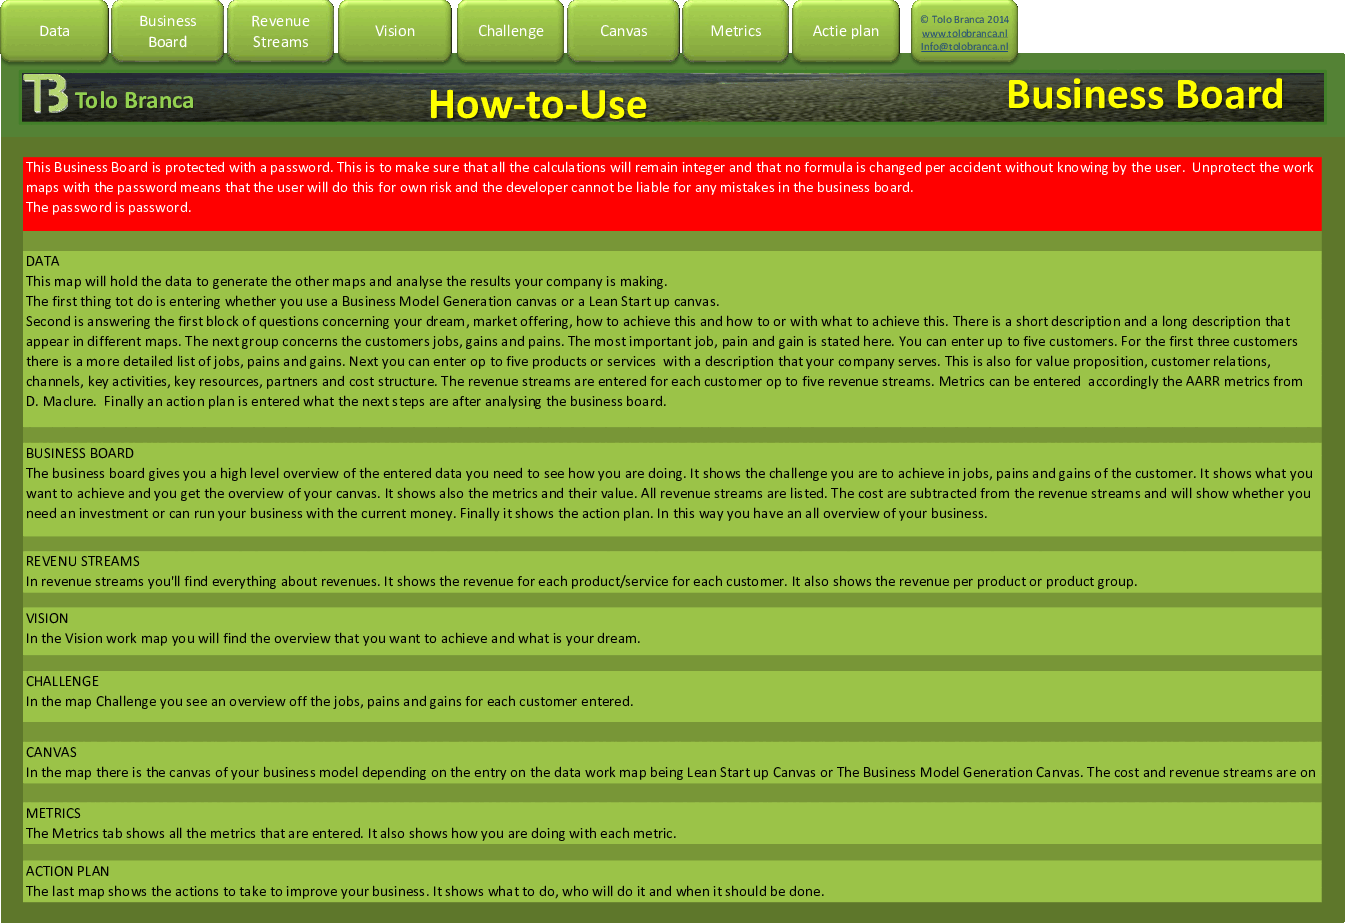 Business Board (Business Planning Tool)